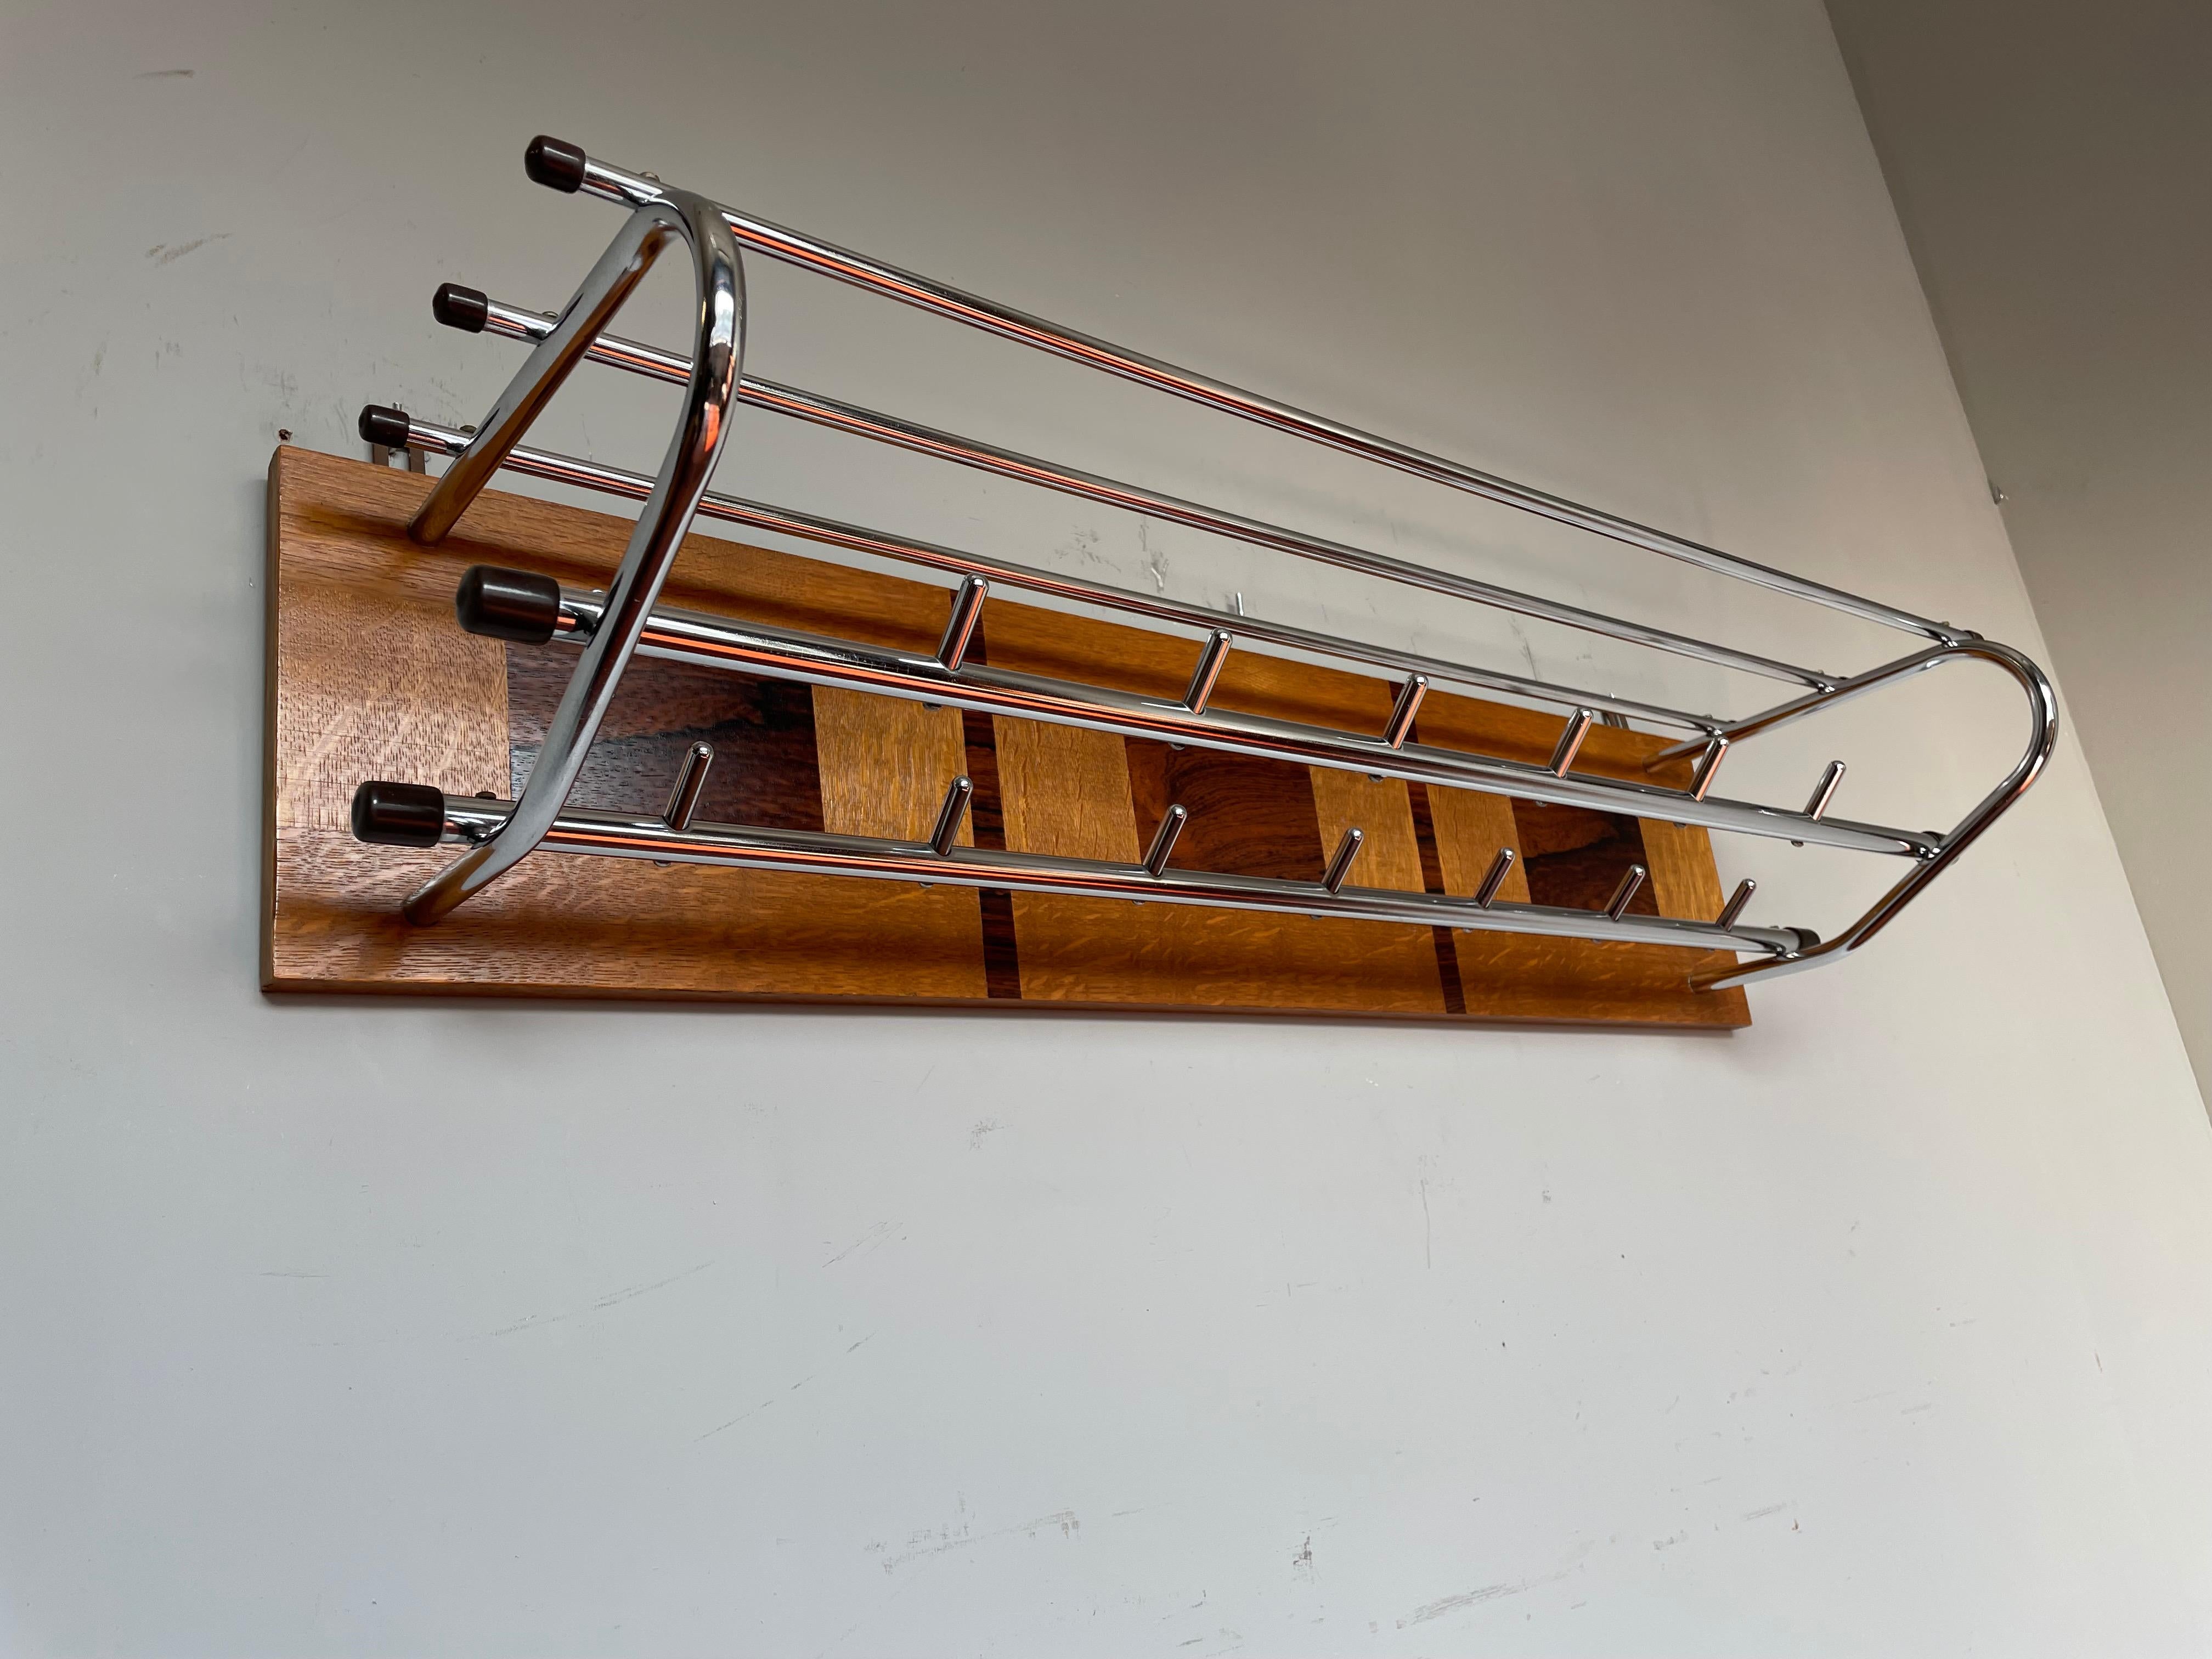 Stunning & Practical Midcentury Modern Wood & Chrome-Steel Wall Coat Rack 1960s In Excellent Condition For Sale In Lisse, NL